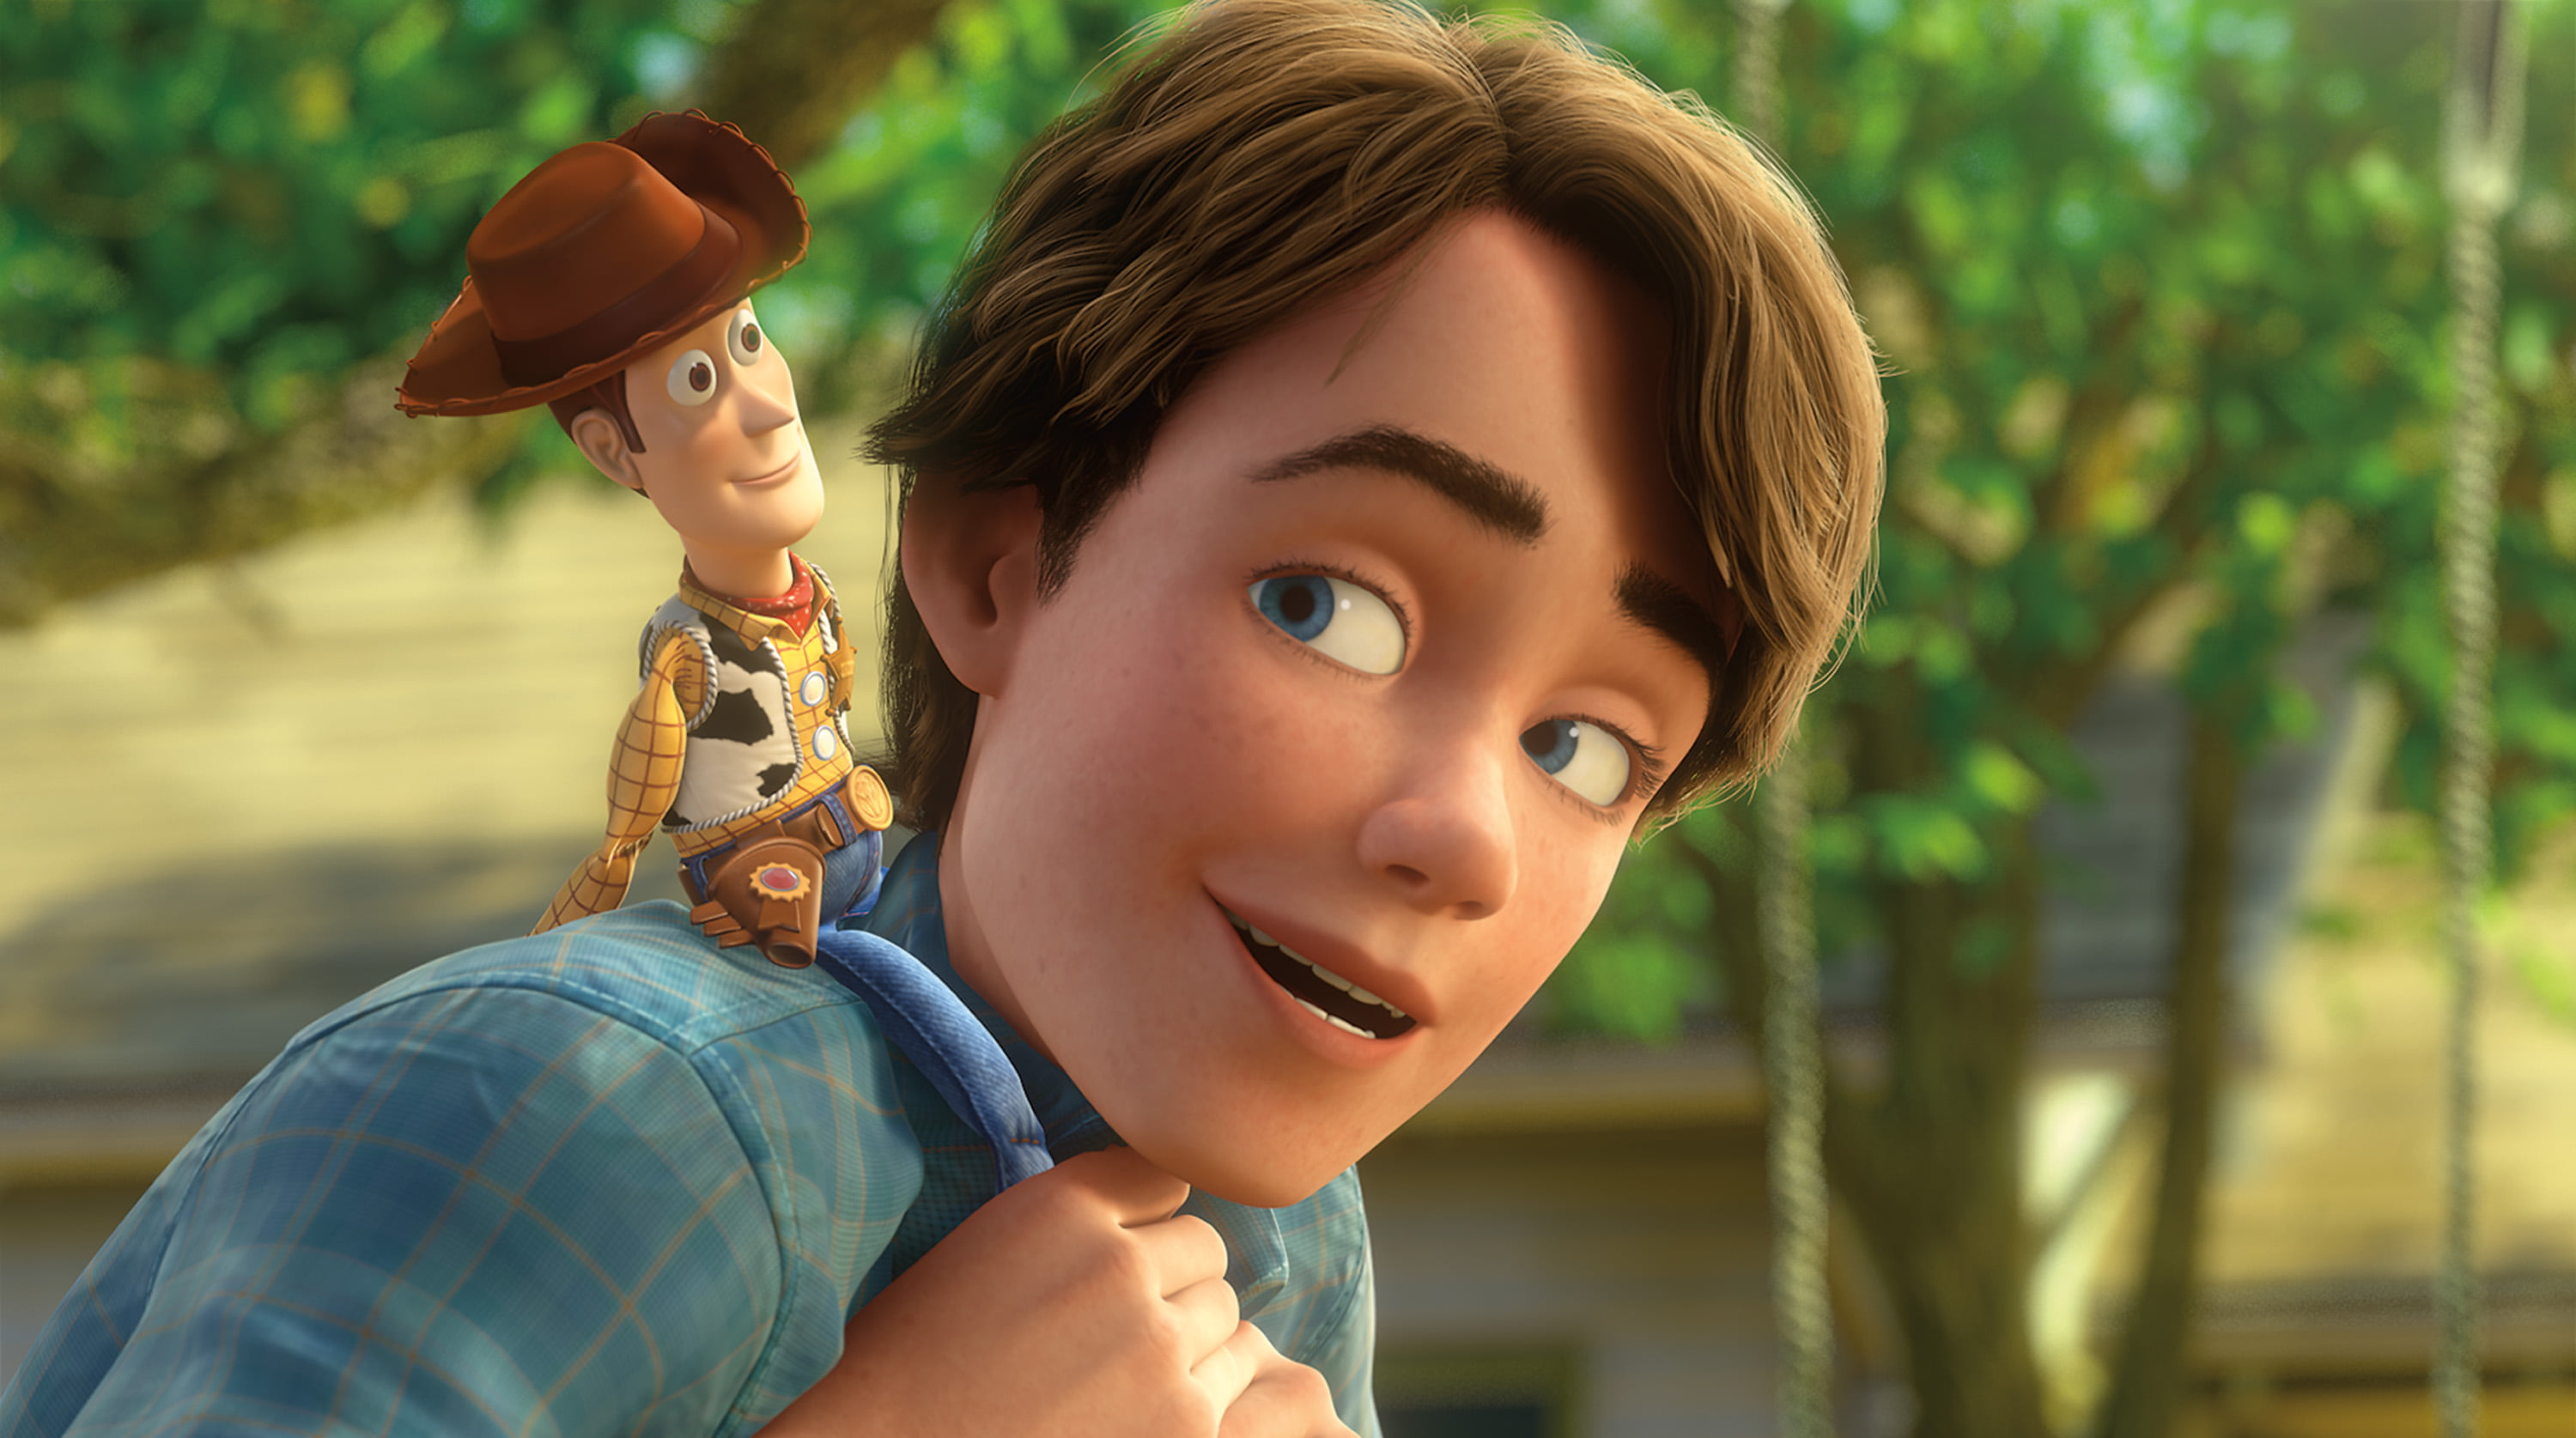 Toy Story 3, Toy Story movie still, Cartoons, portrait, focus on foreground